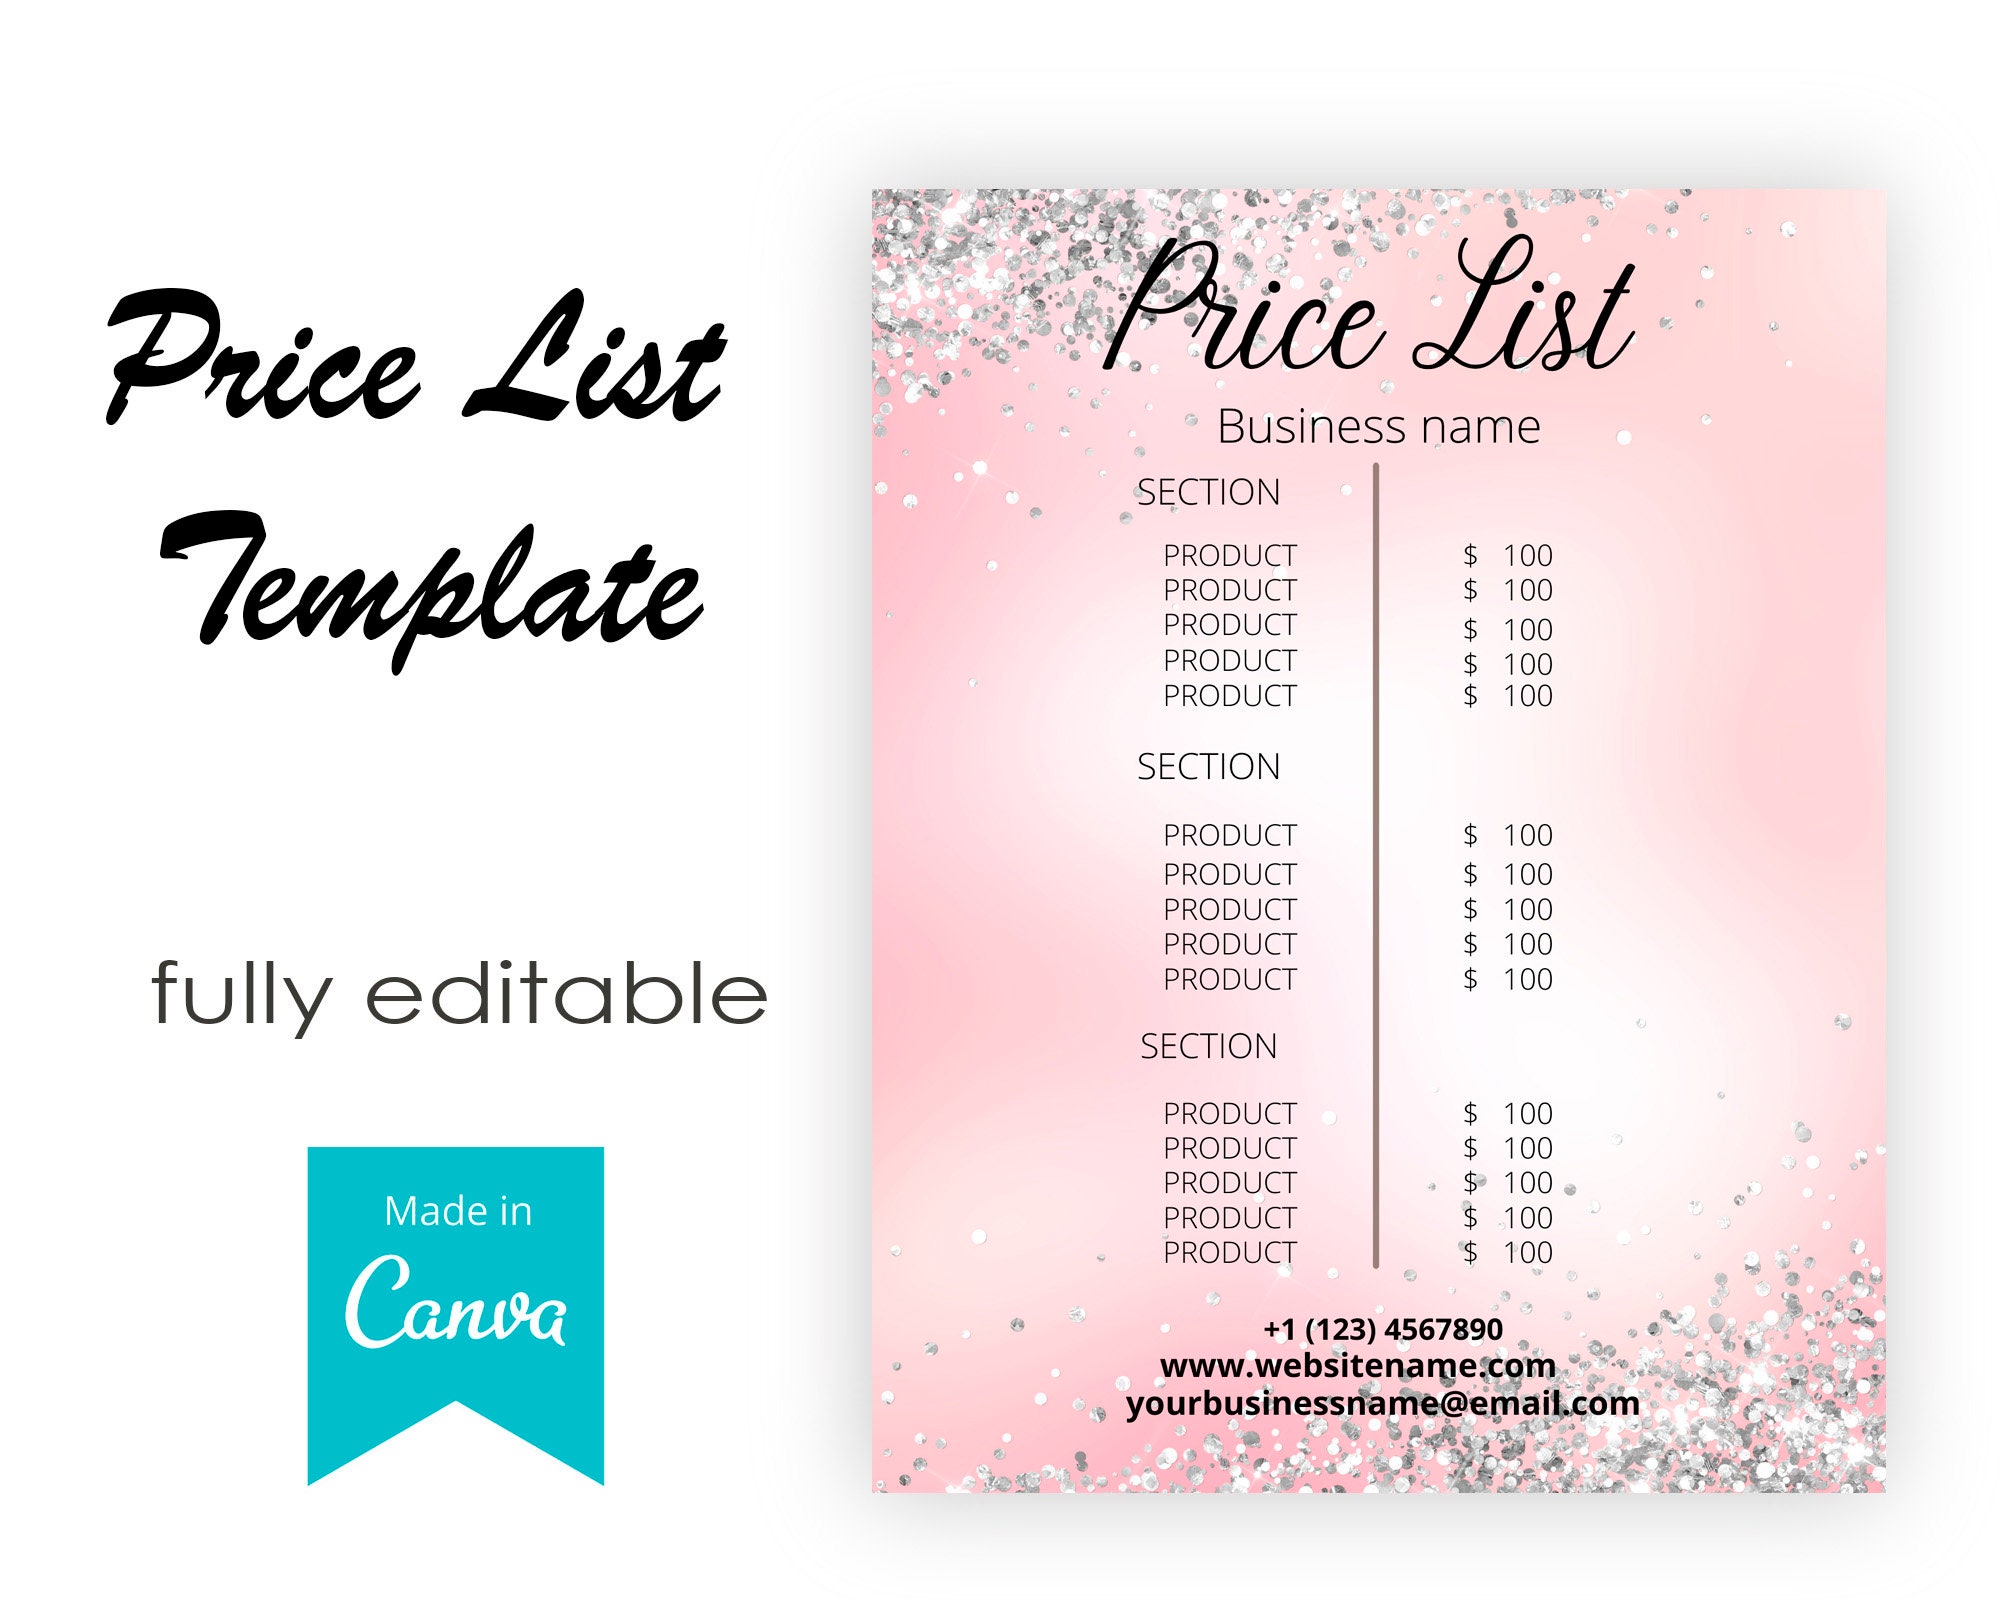 price-list-template-editable-in-canva-blush-pink-pricelist-etsy